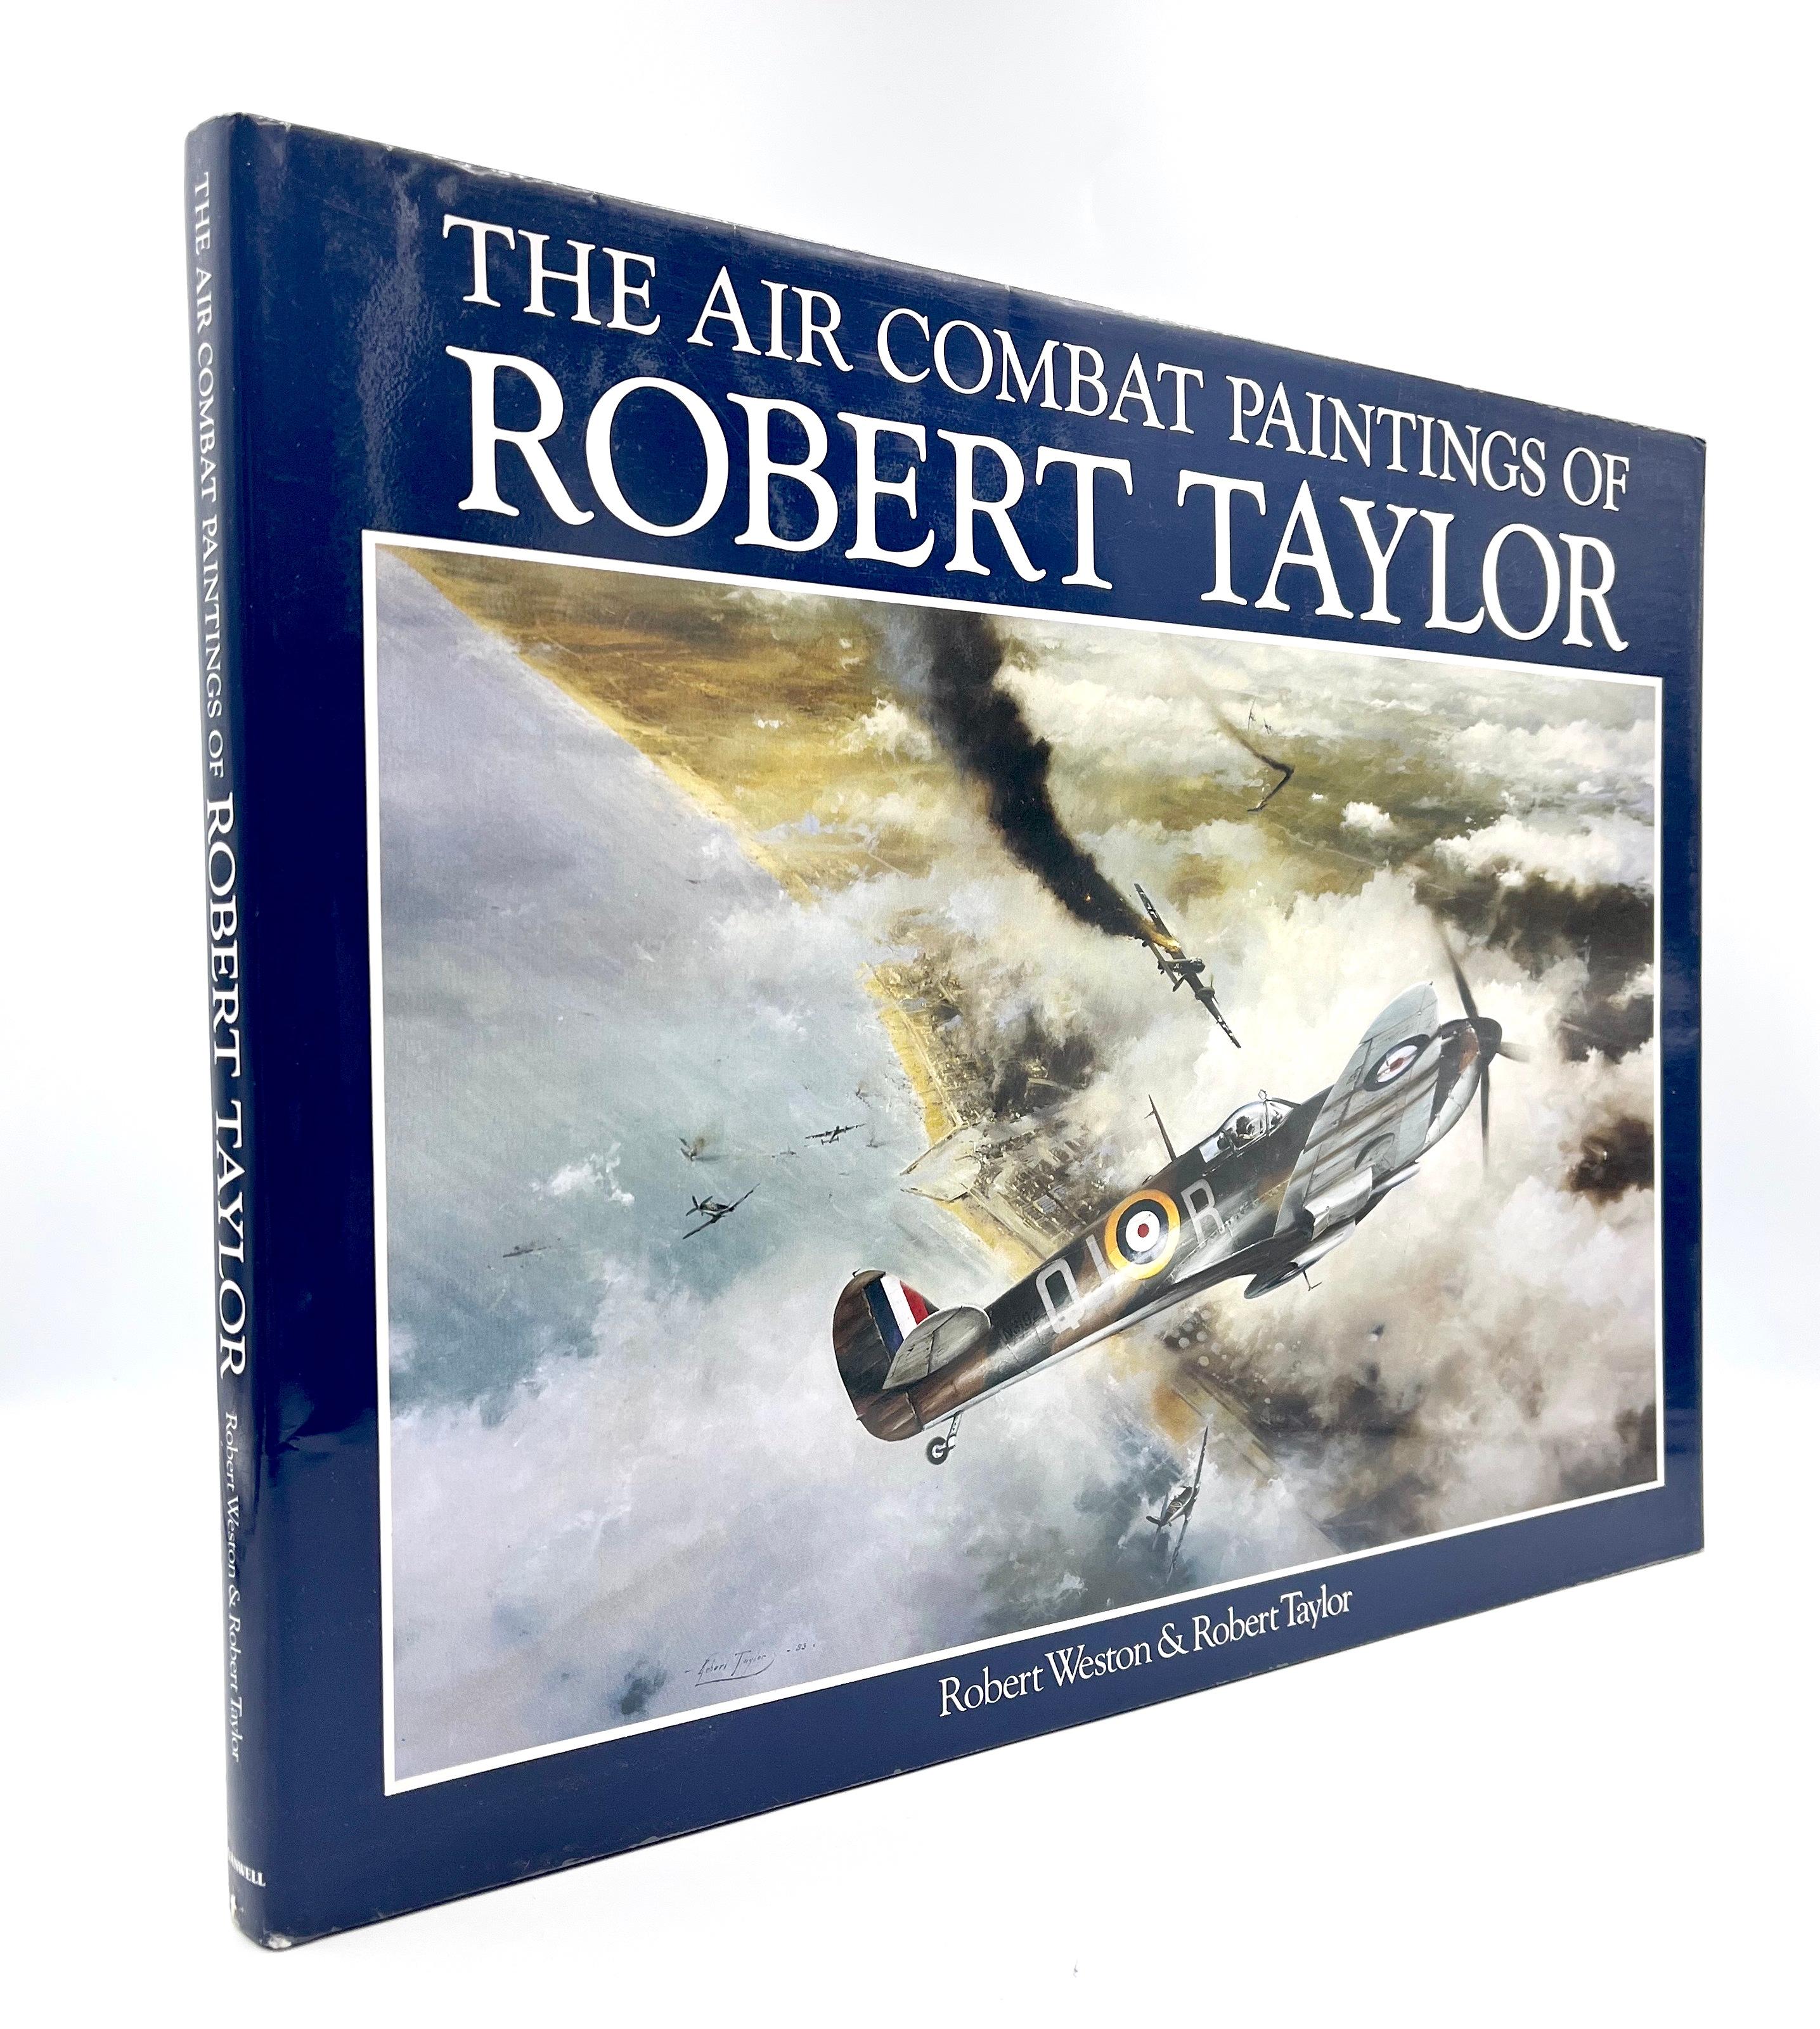 Taylor, Robert, with Robert Weston. The Air Combat Paintings of Robert Taylor. St. Catherines: Vanwell Publishing Limited, 1987. First edition printing. Blue cloth boards with gilt titles to the spine. Original dust jacket. 

Presented is a first